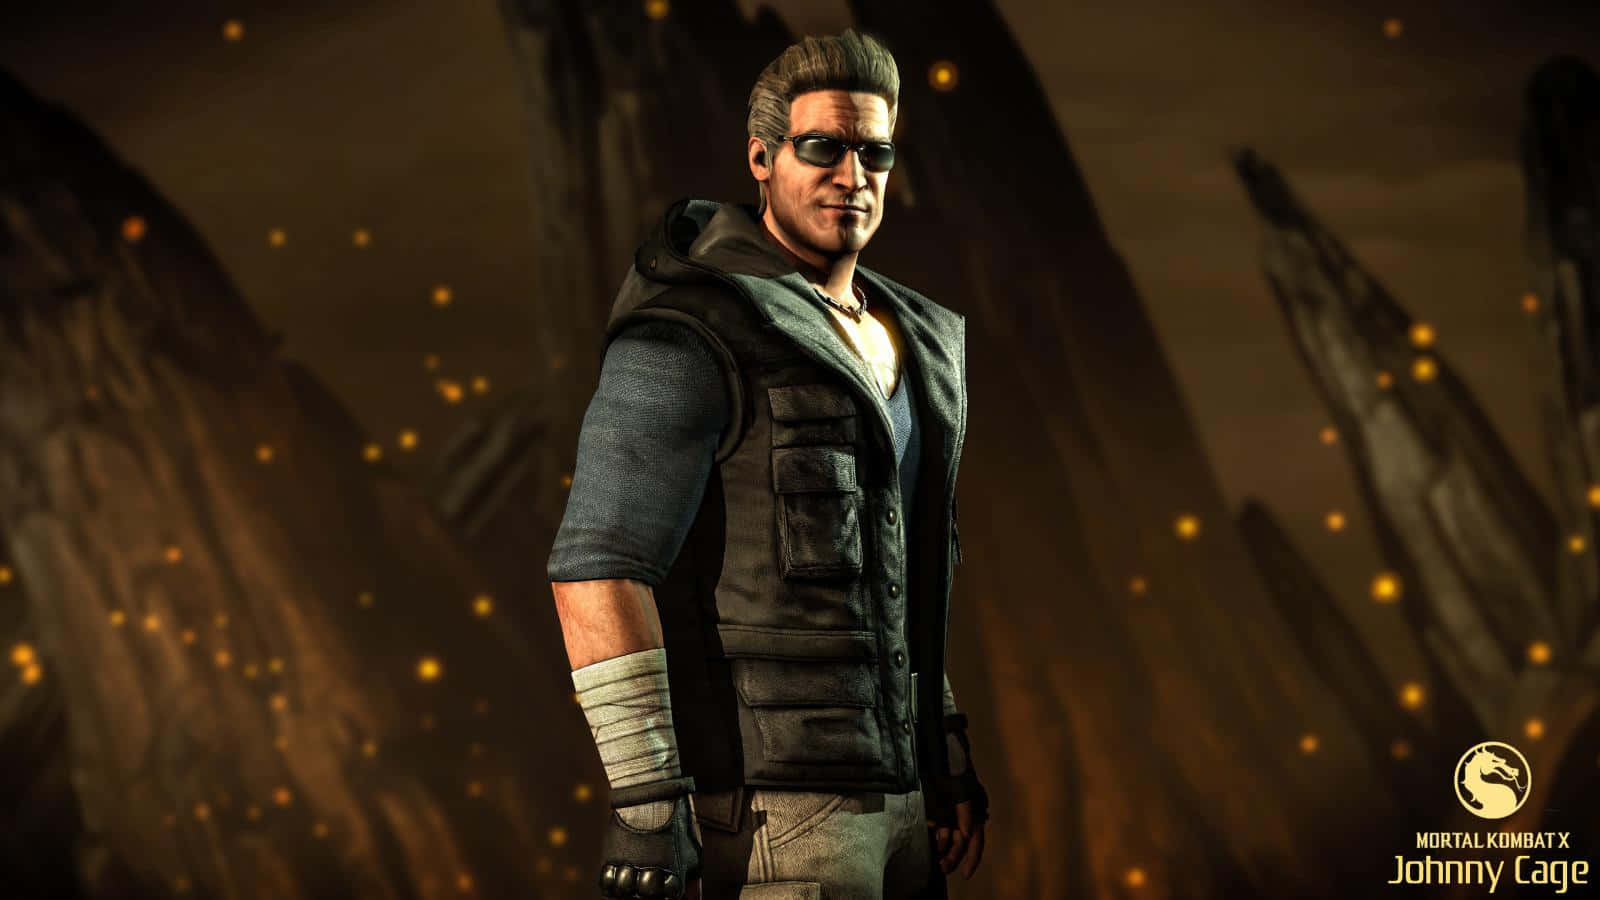 Johnny Cage showcasing his martial arts prowess Wallpaper